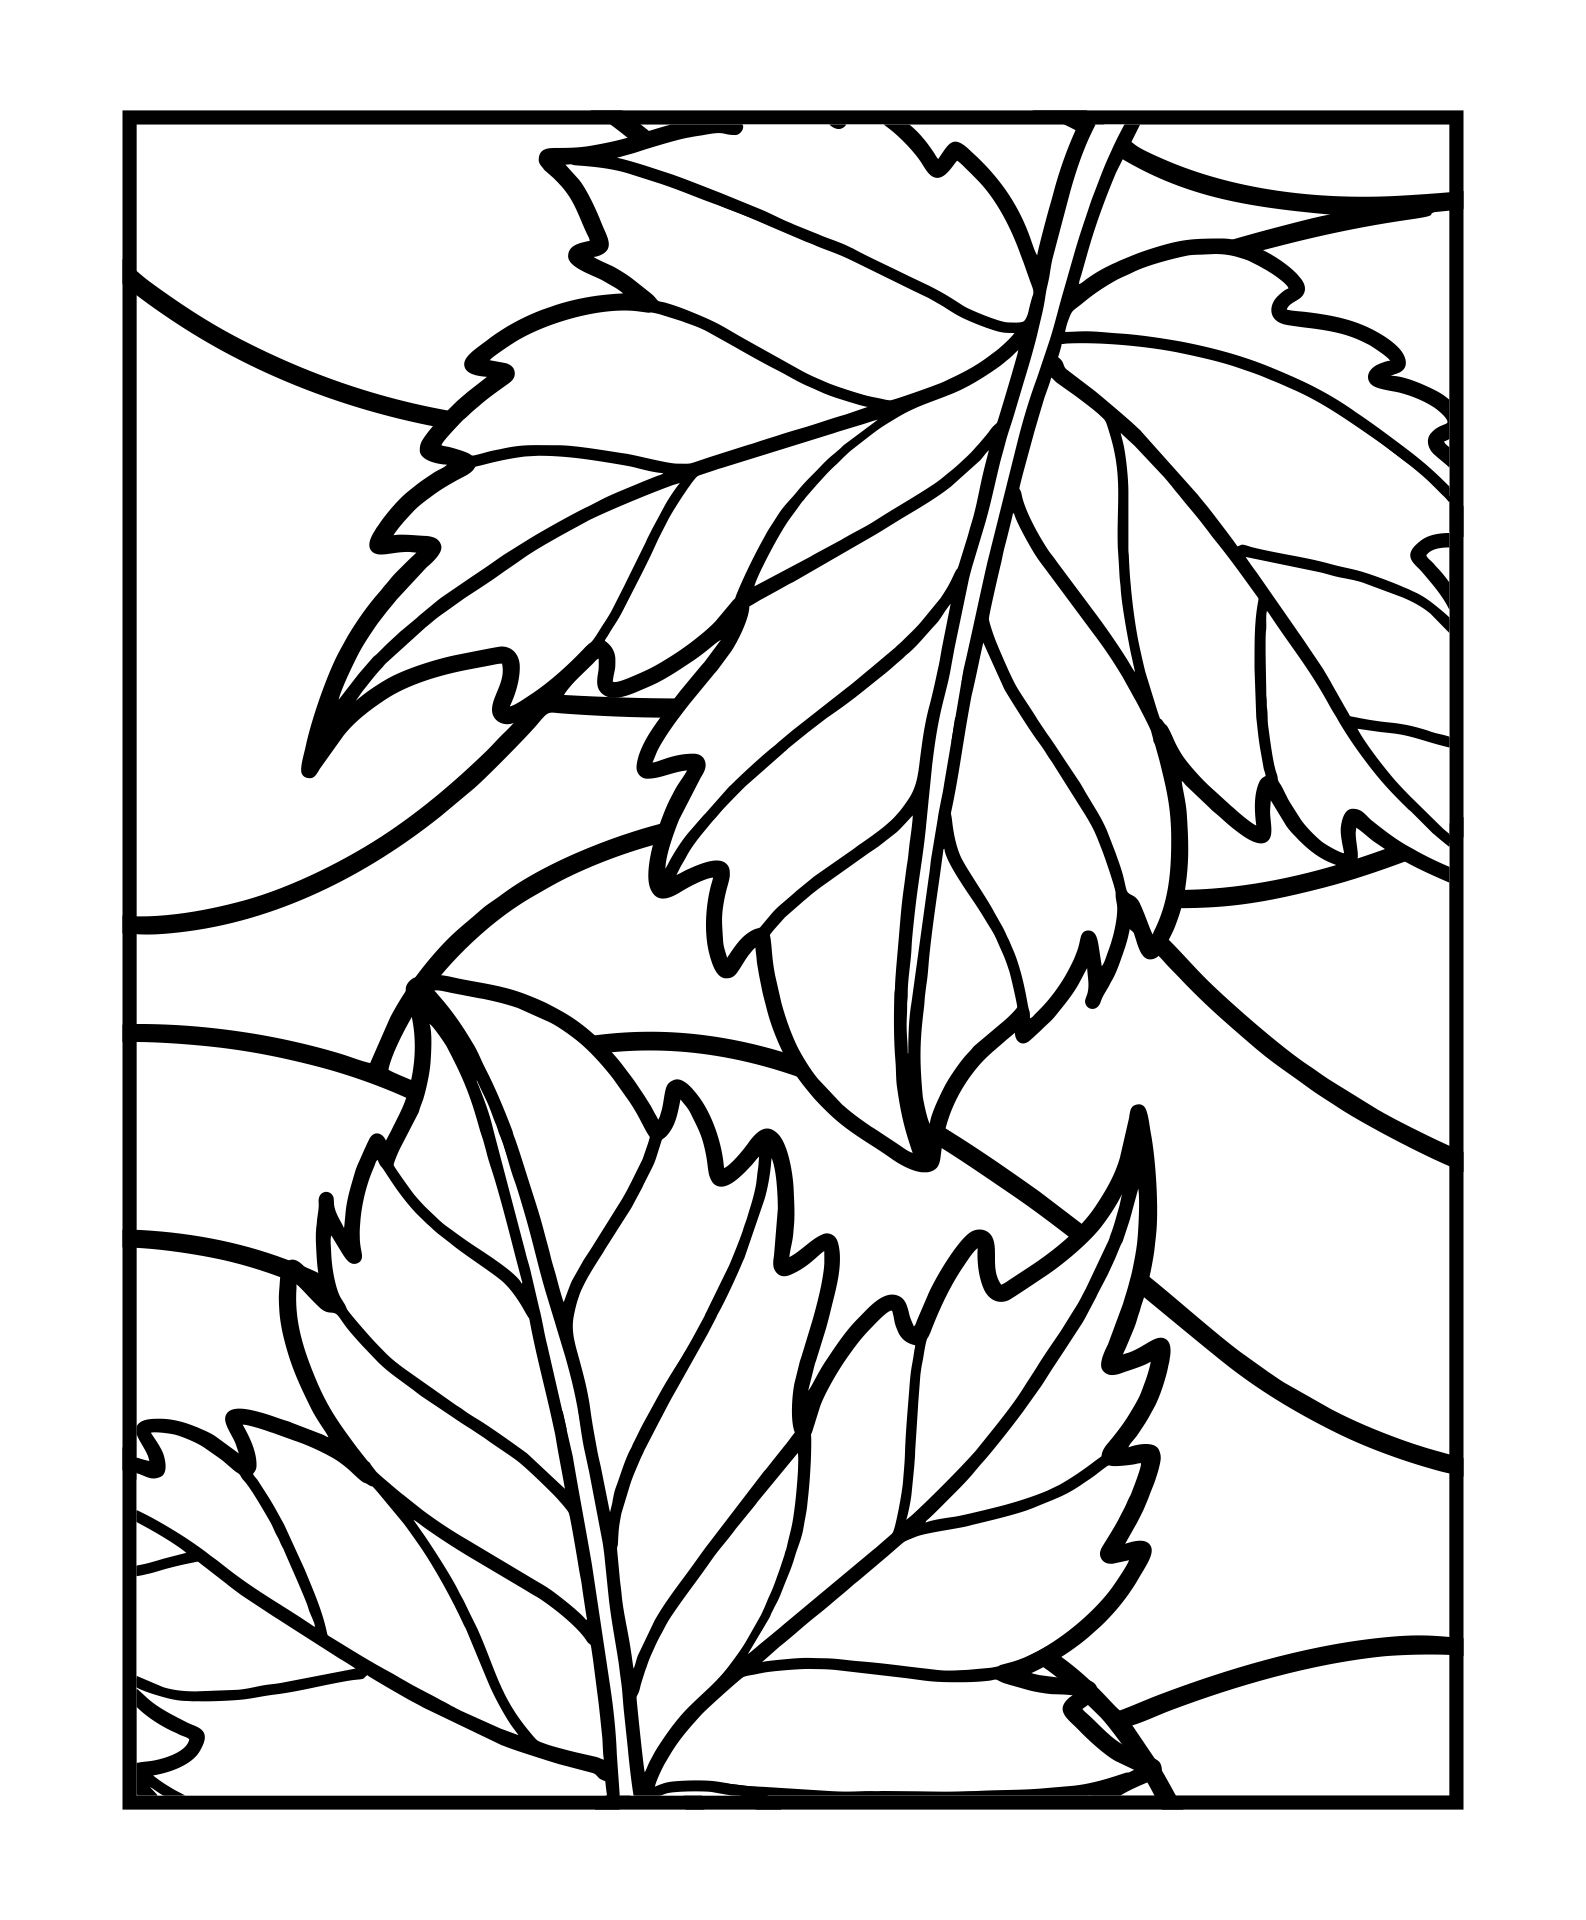 Printable Fall Leaf Stained Glass Patterns